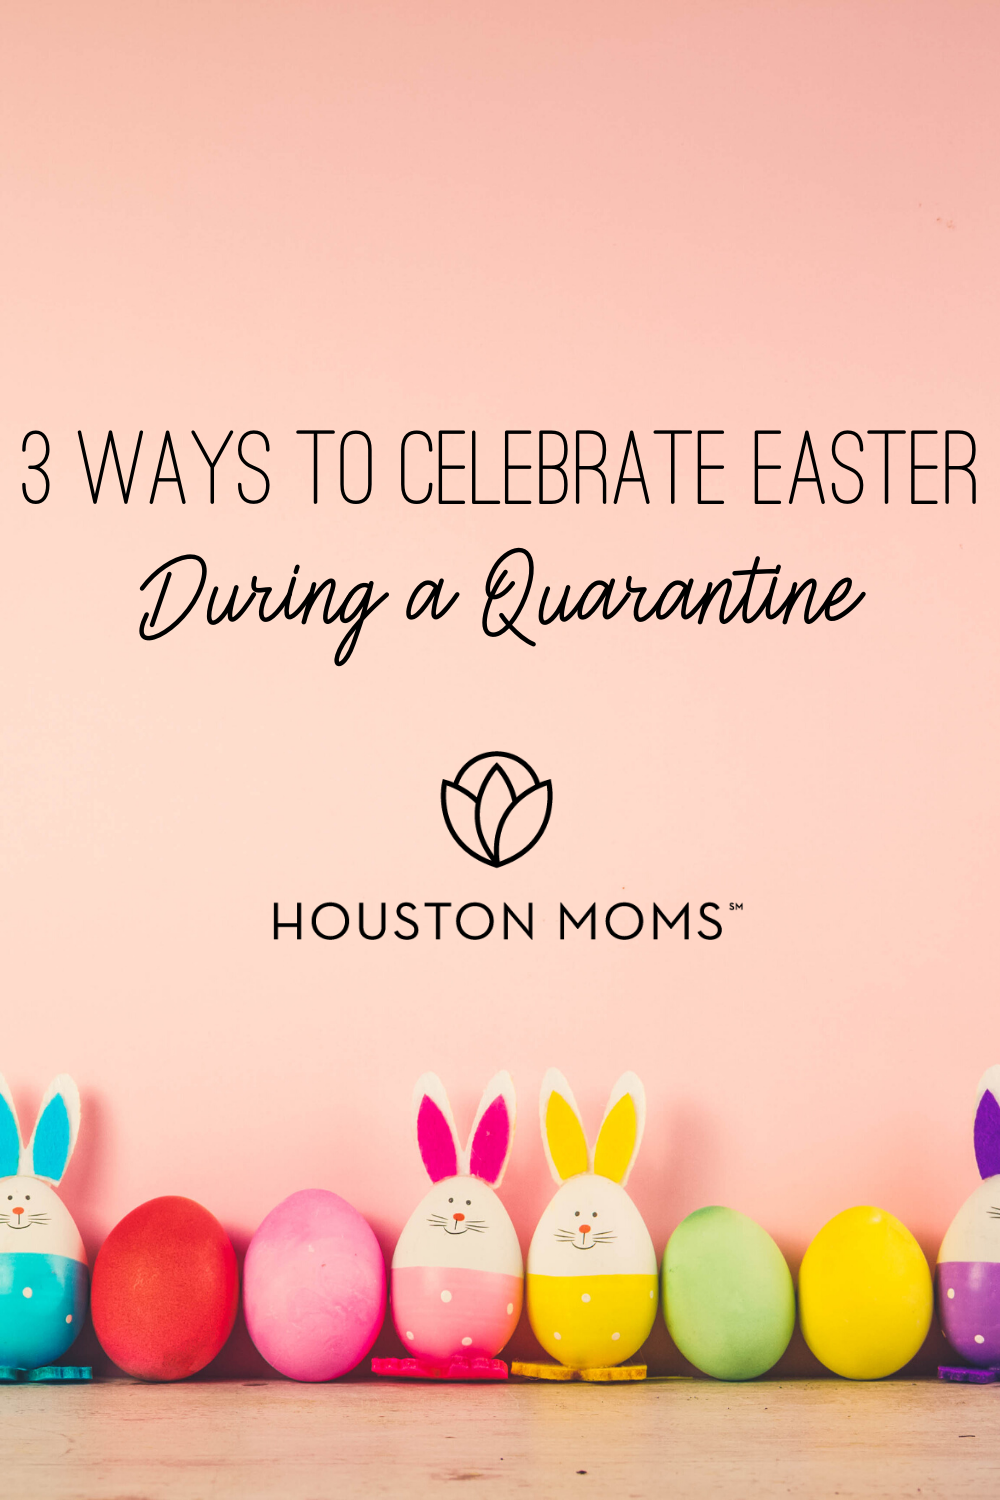 Houston Moms "3 Ways to Celebrate Easter During a Quarantine" #houstonmoms #houstonmomsblog #momsaroundhouston